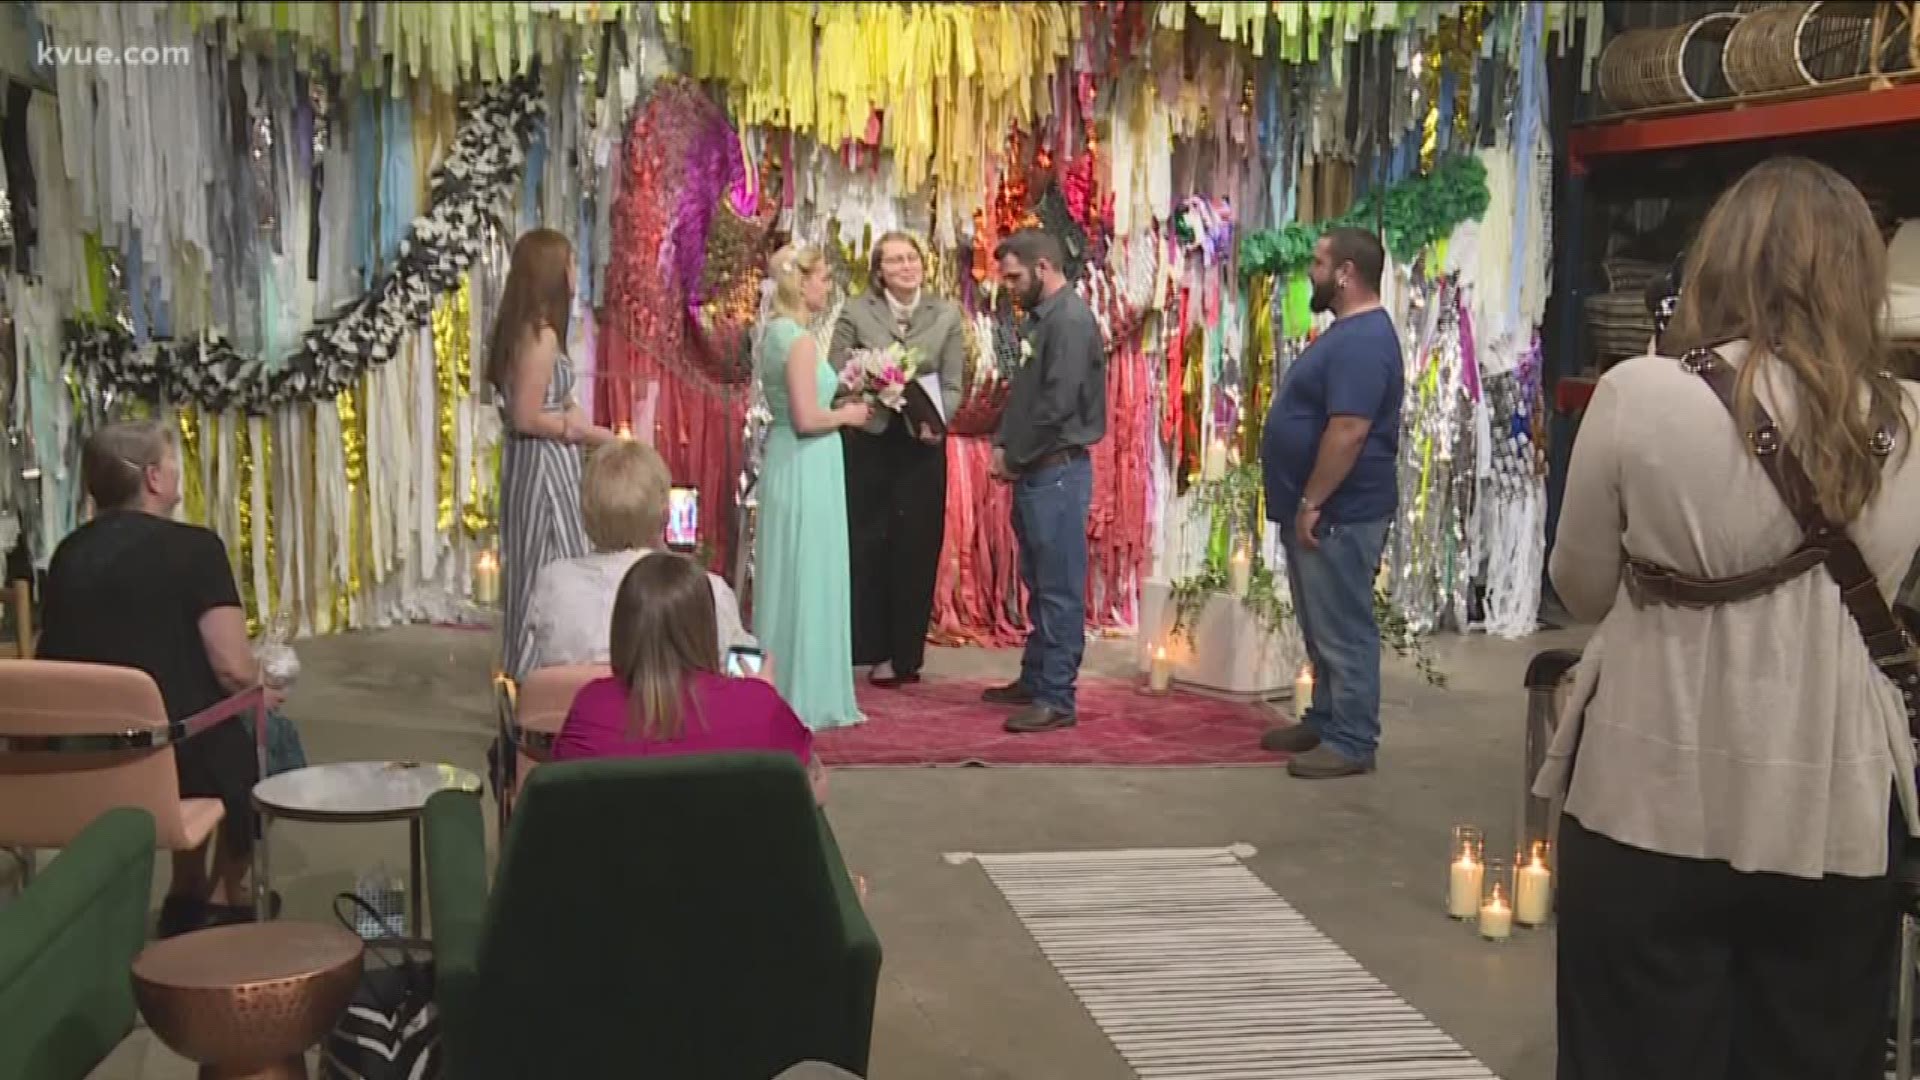 A group of Austin wedding vendors gave 10 couples a Valentine's Day present: all the celebration of a wedding...for free!